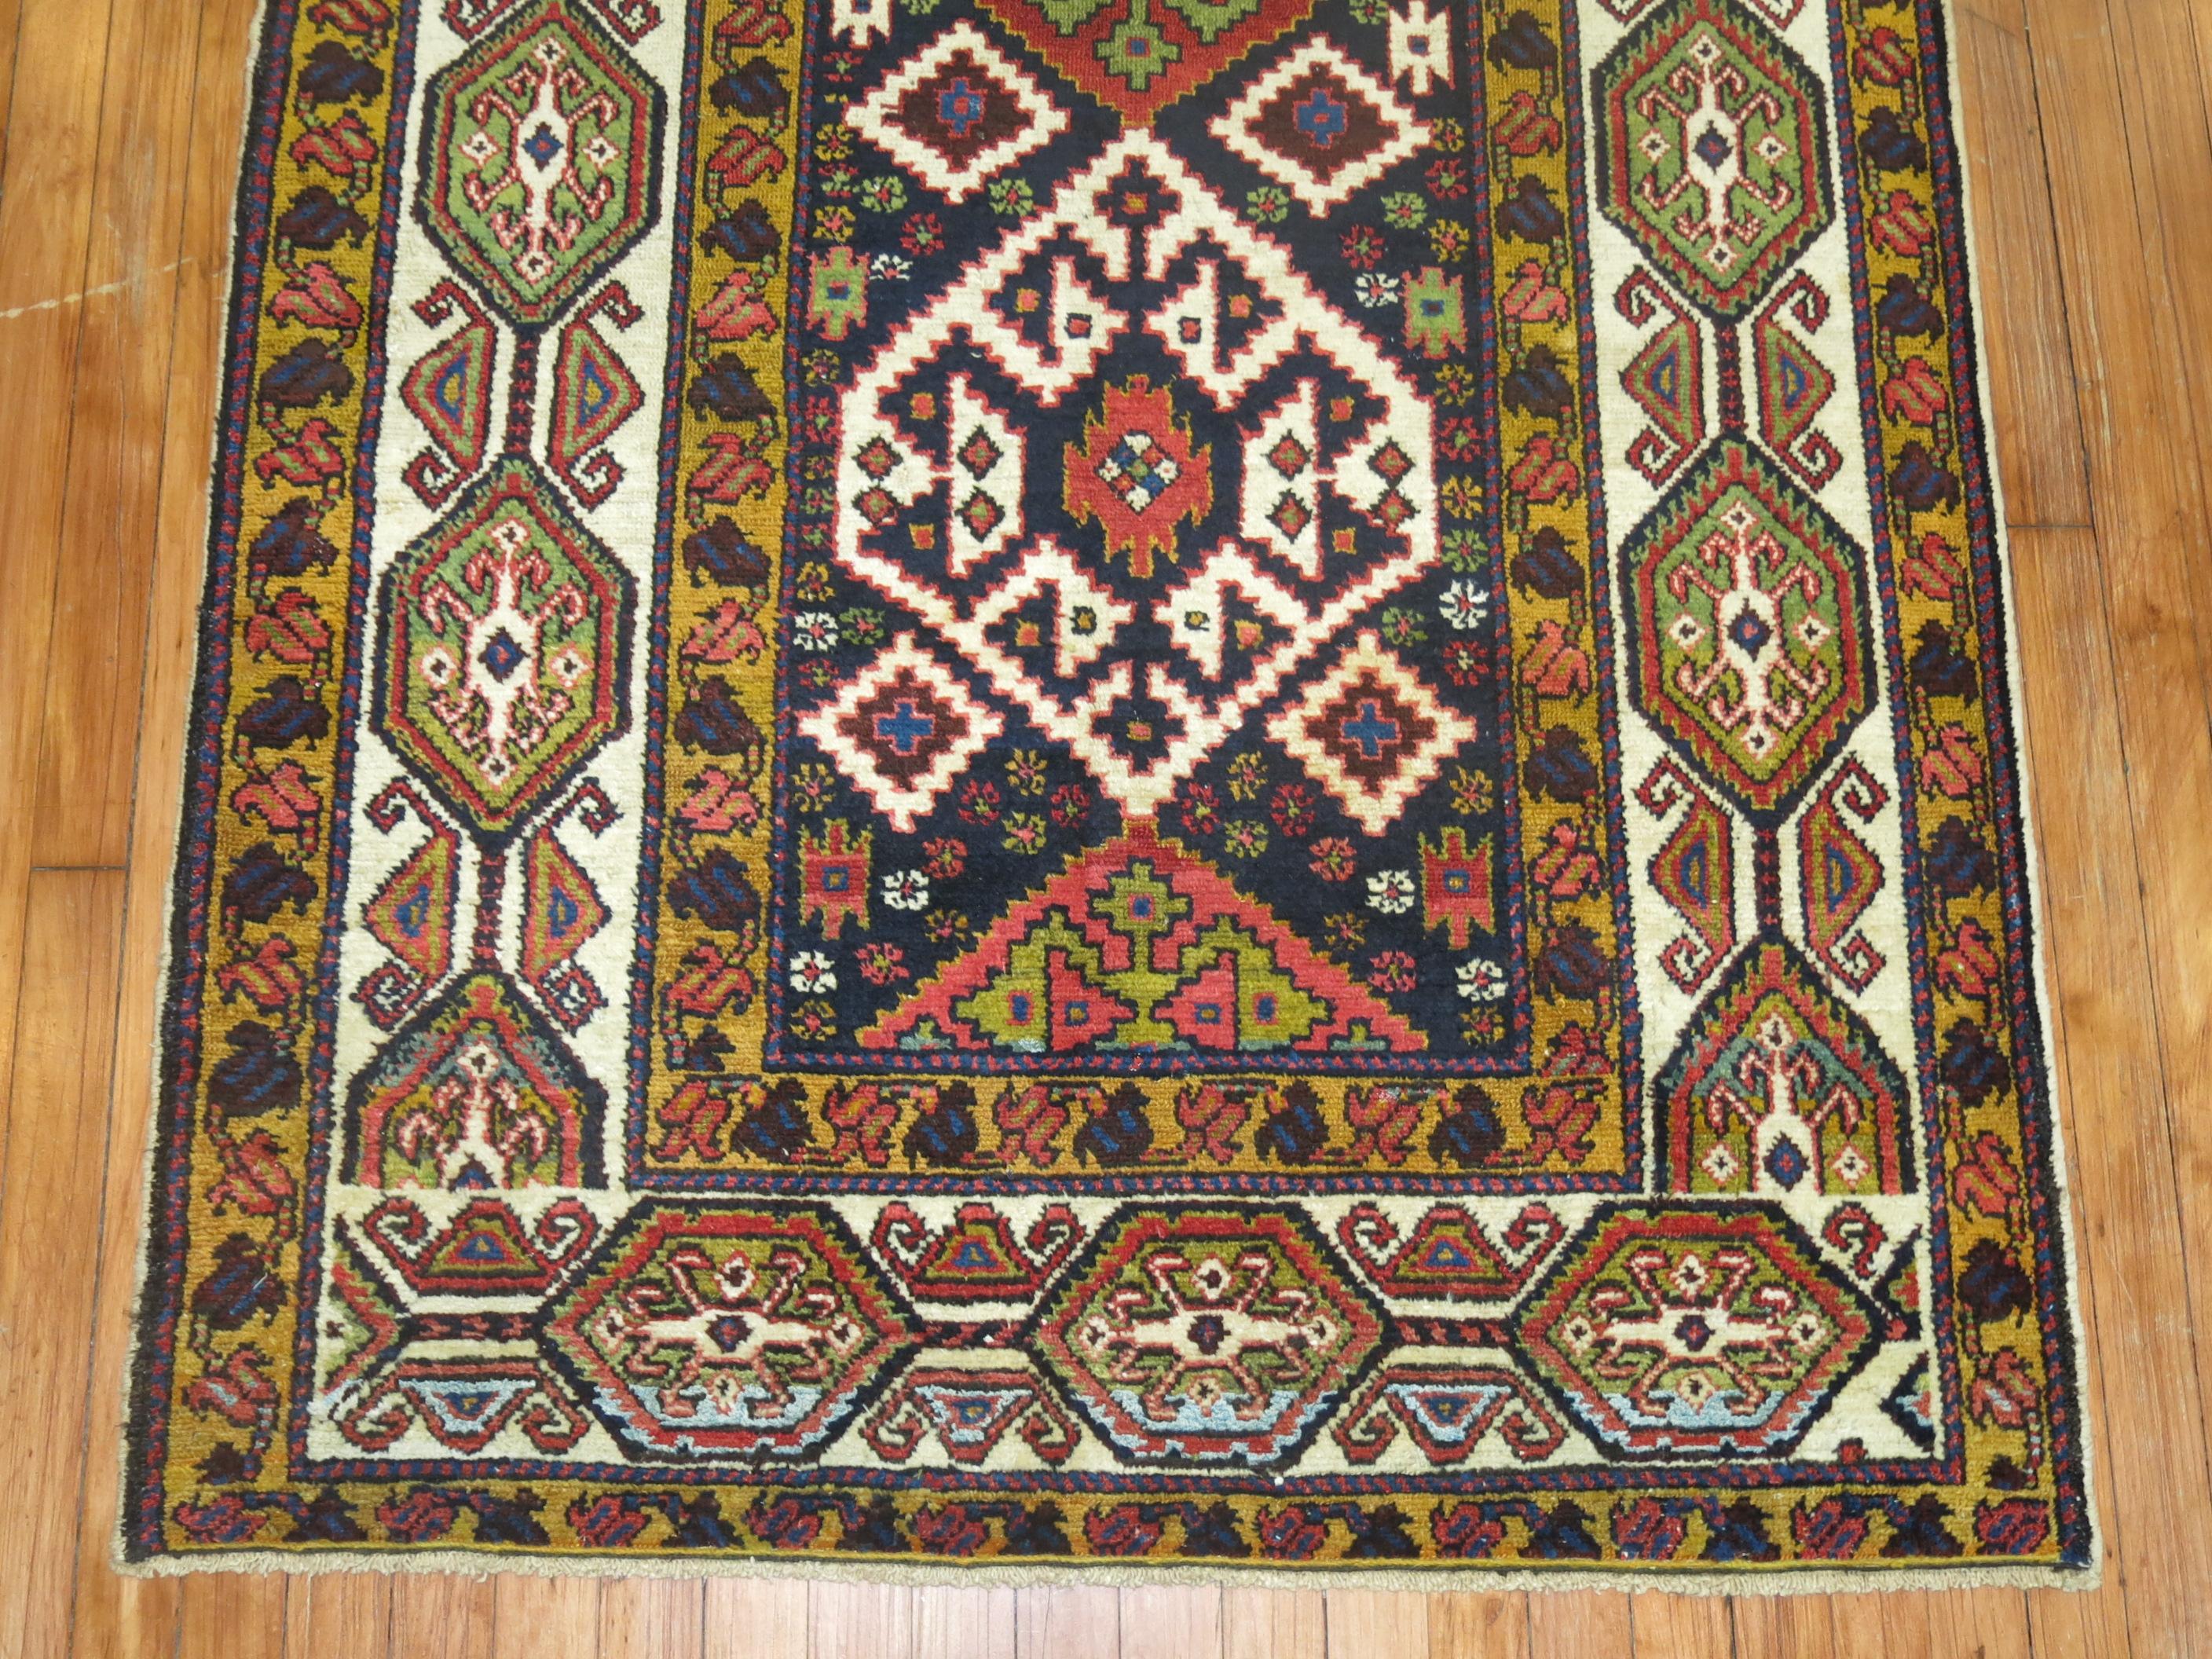 Colorful Persian Bakhtiari runner with a geometric design on a navy ground, circa 1930.

Measures: 3'9